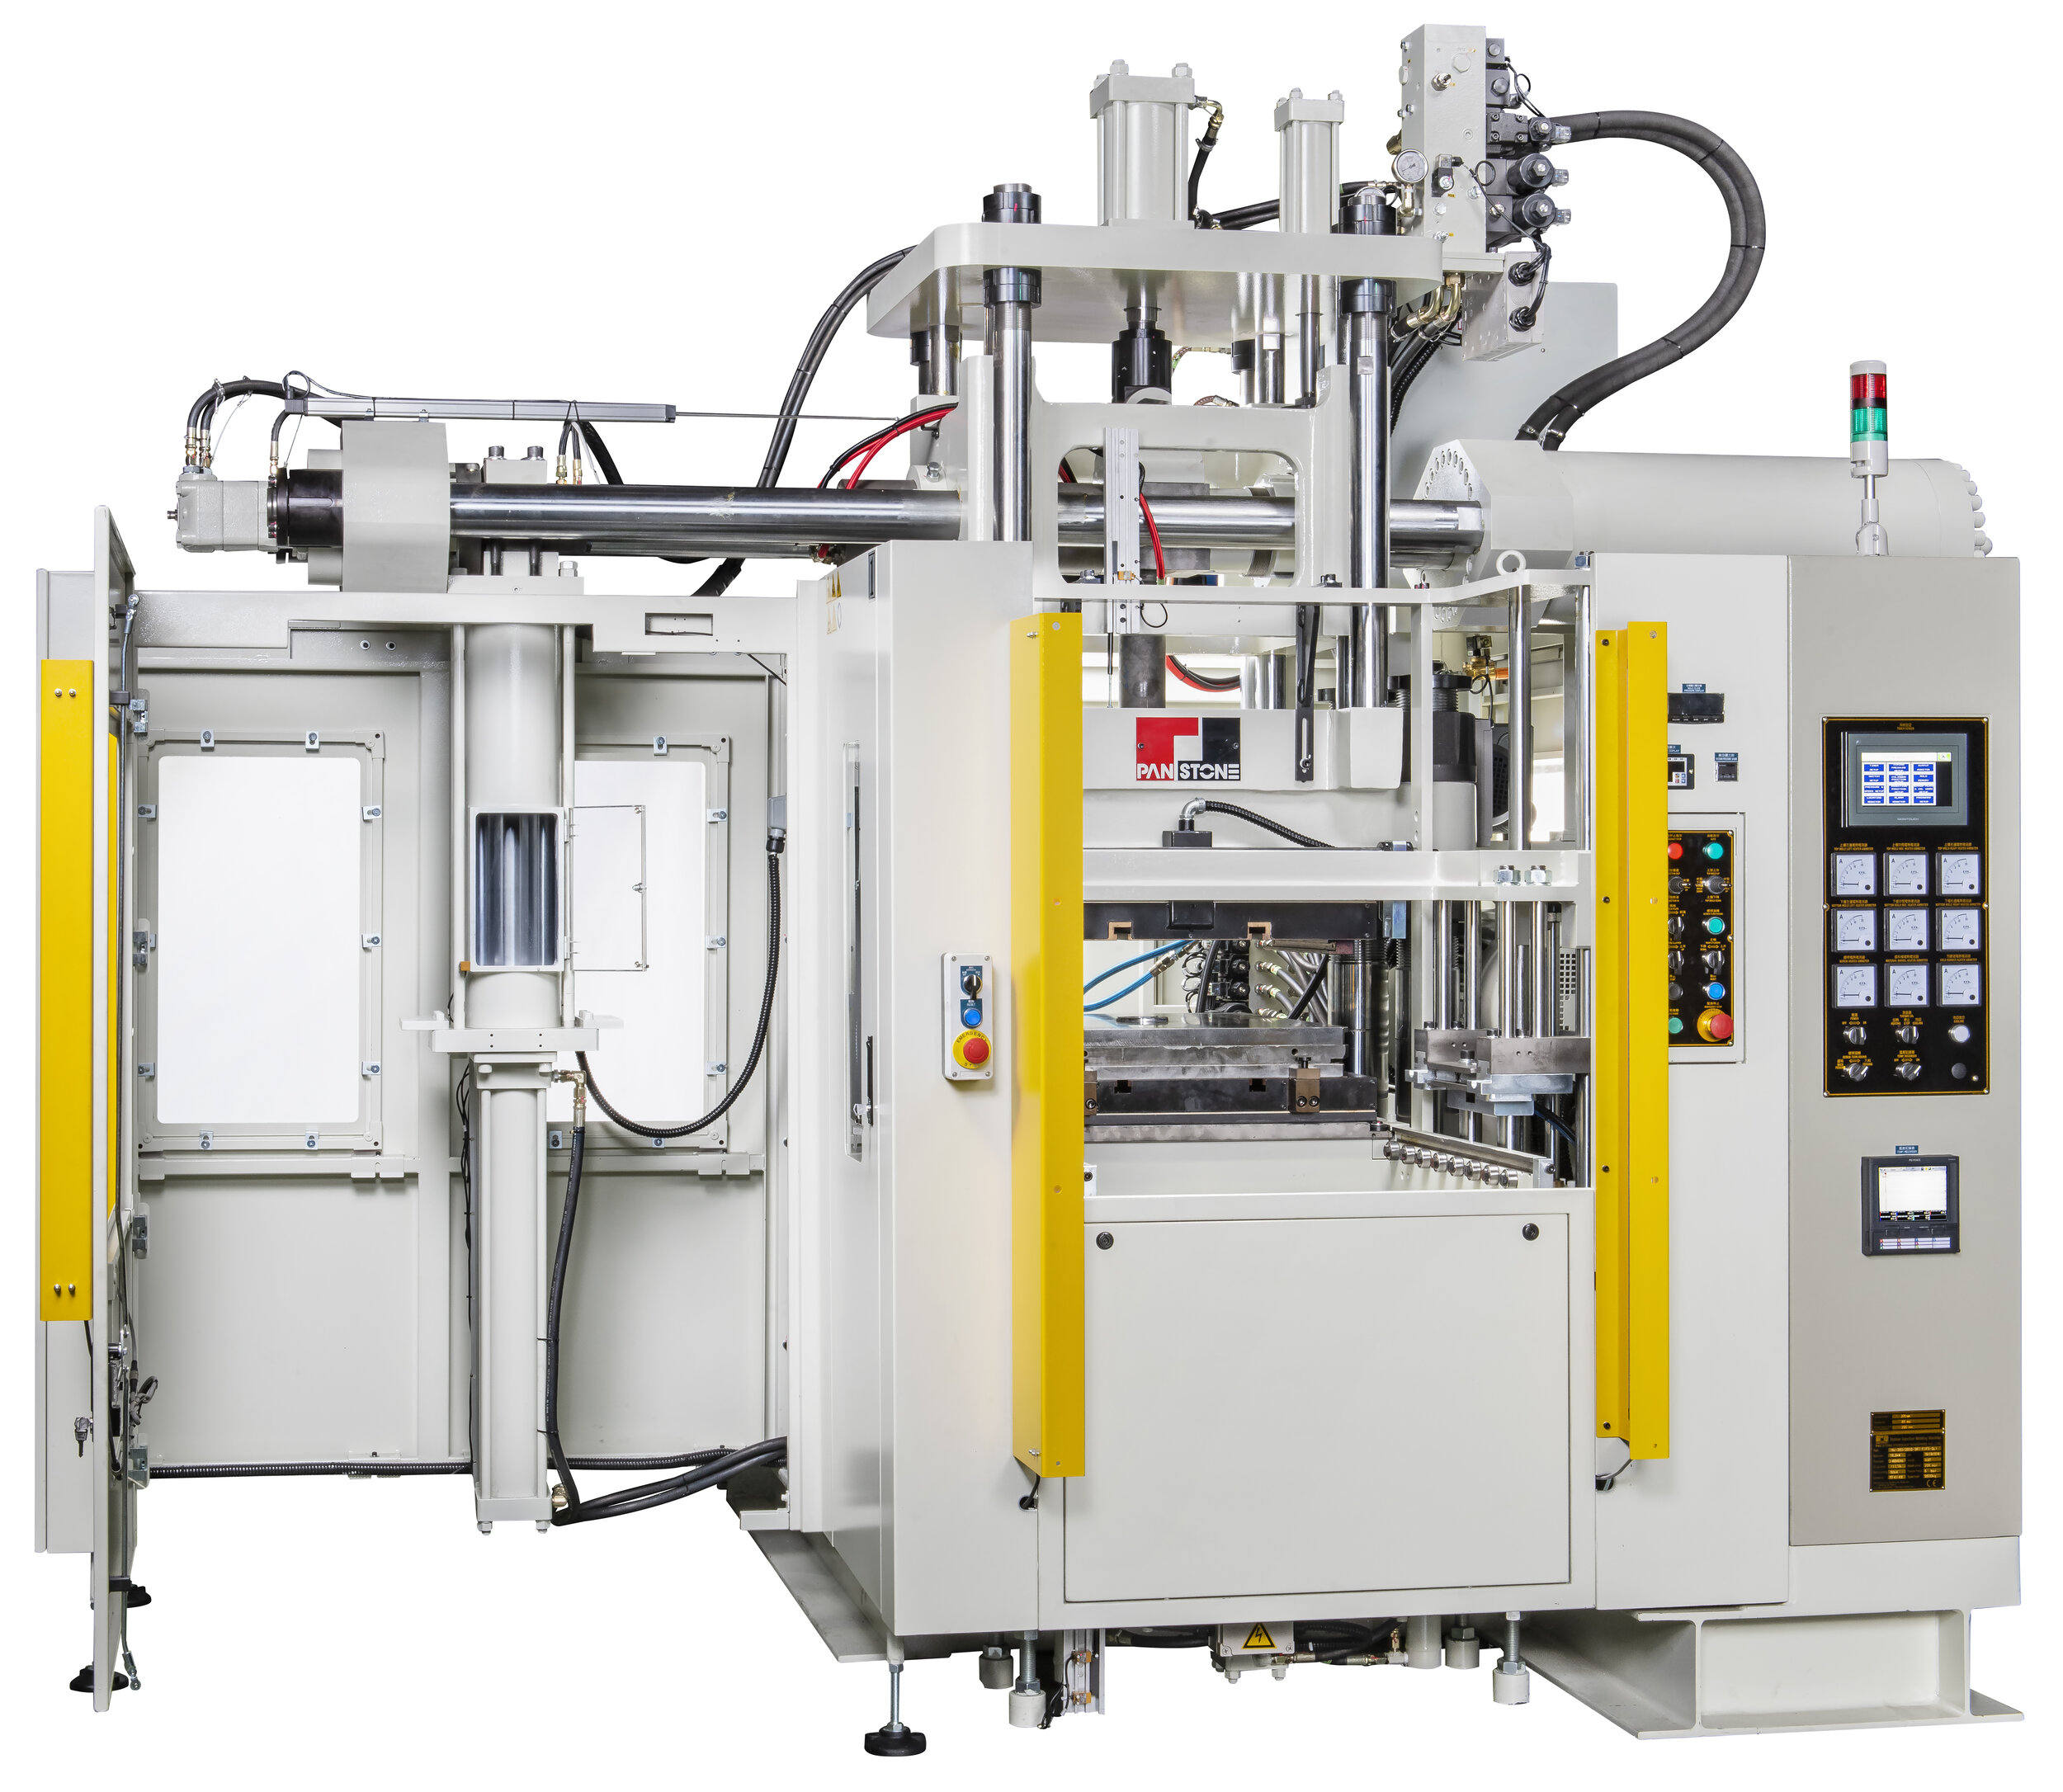 Rubber Injection Molding Machines - FIFO System with precise and accurate rubber flowExact position of mold for flawless repeatabilityMold handling/part ejection for improved productivity